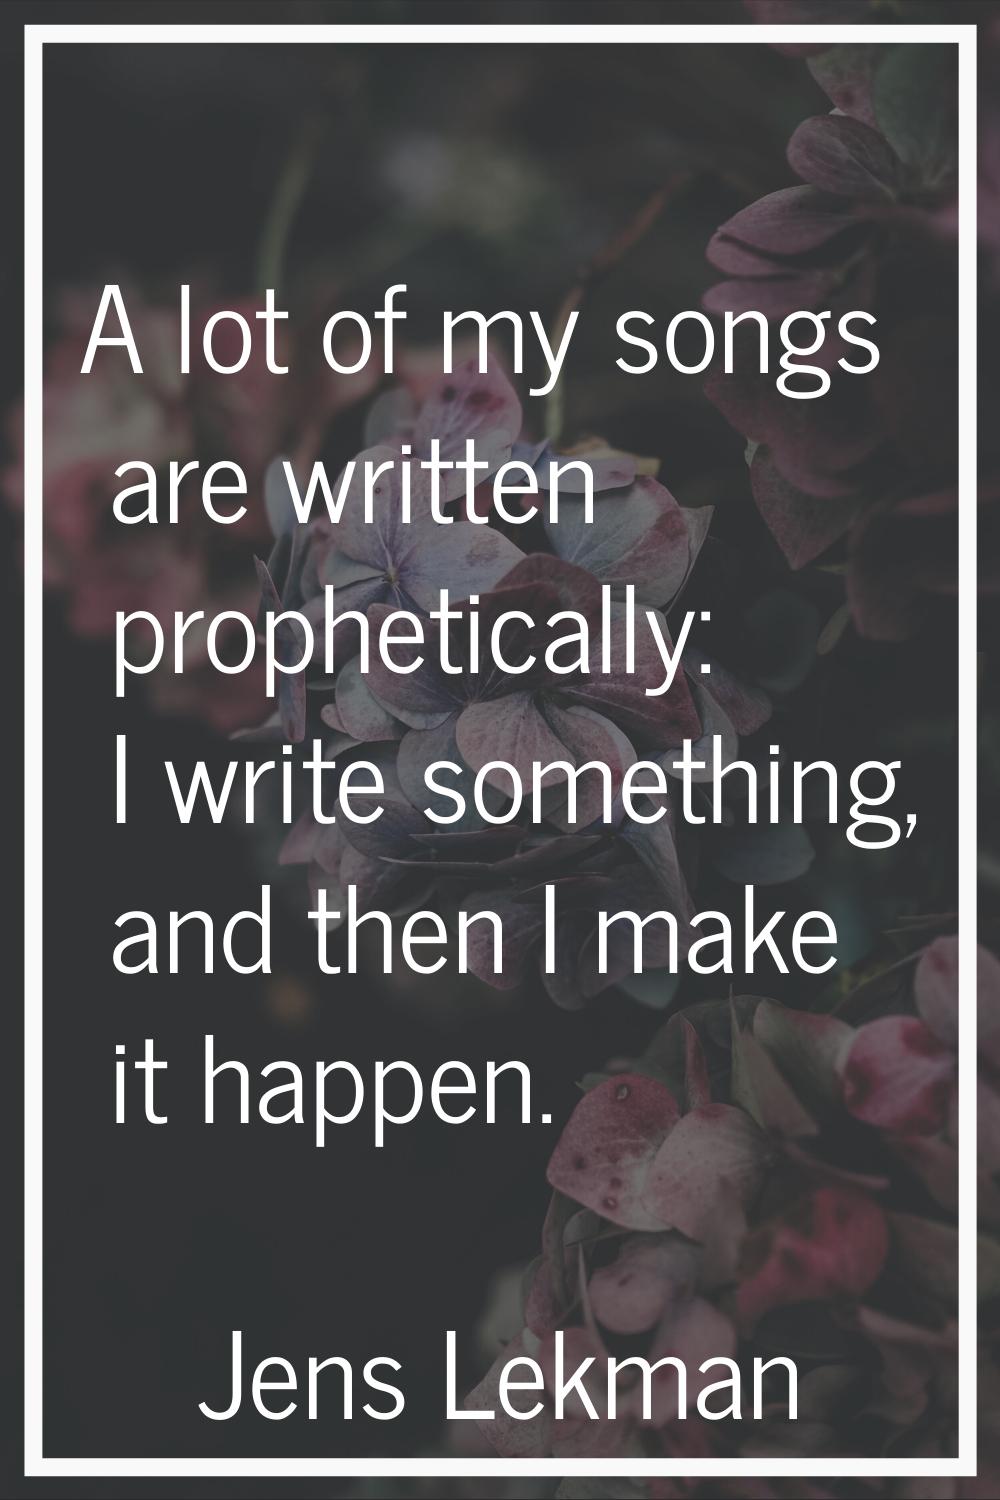 A lot of my songs are written prophetically: I write something, and then I make it happen.